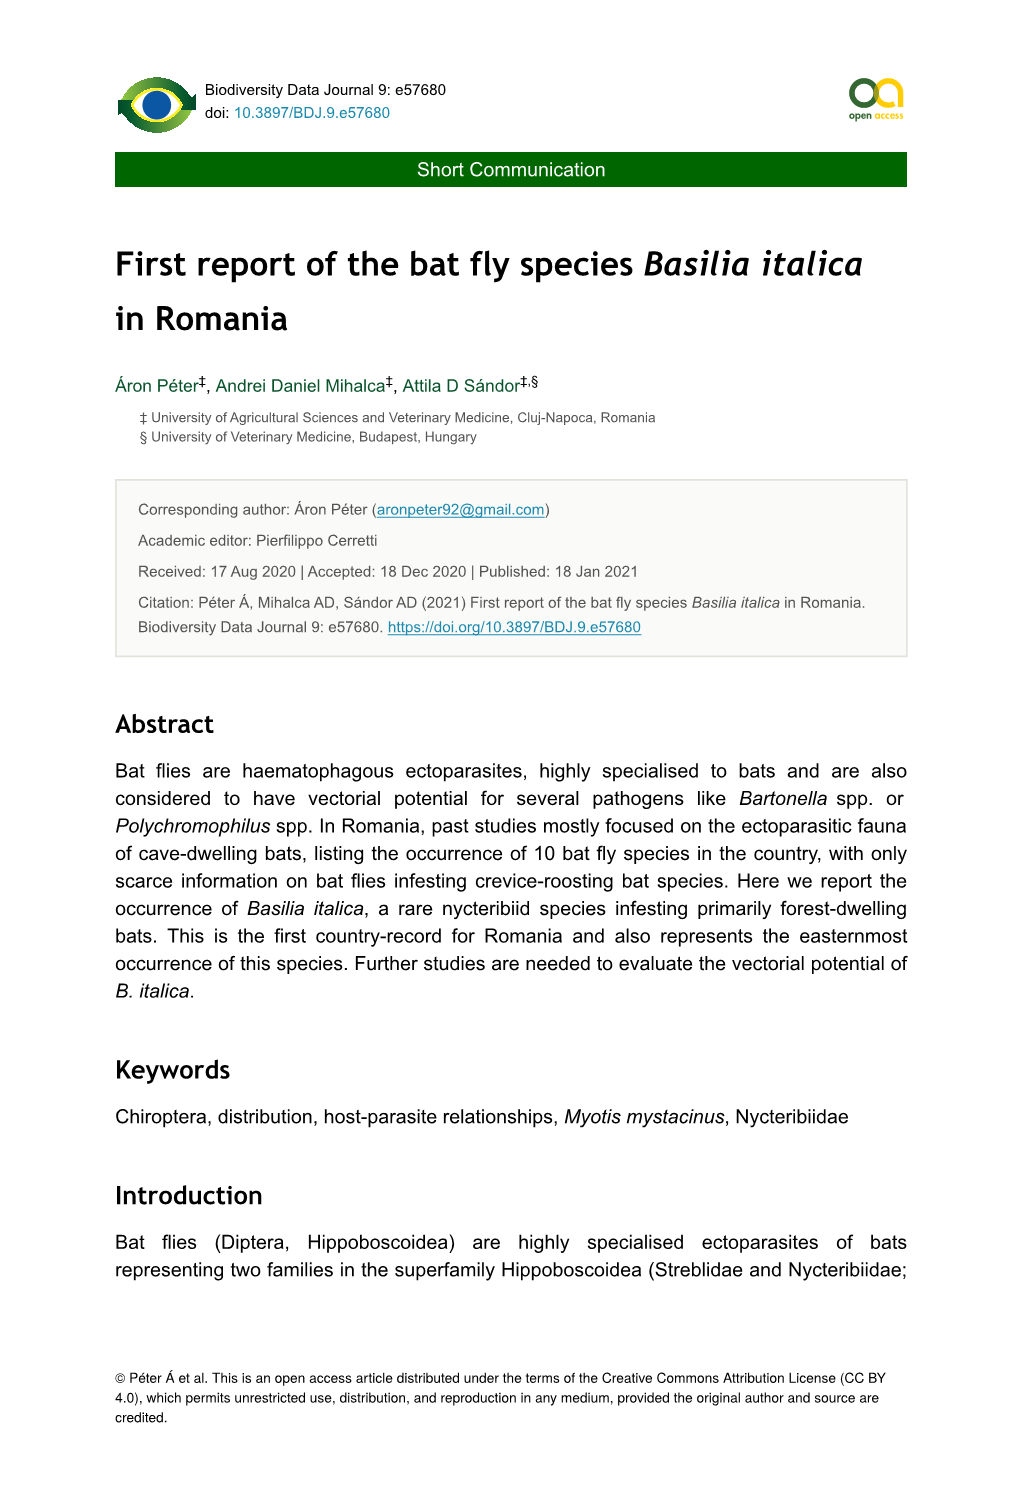 First Report of the Bat Fly Species Basilia Italica in Romania